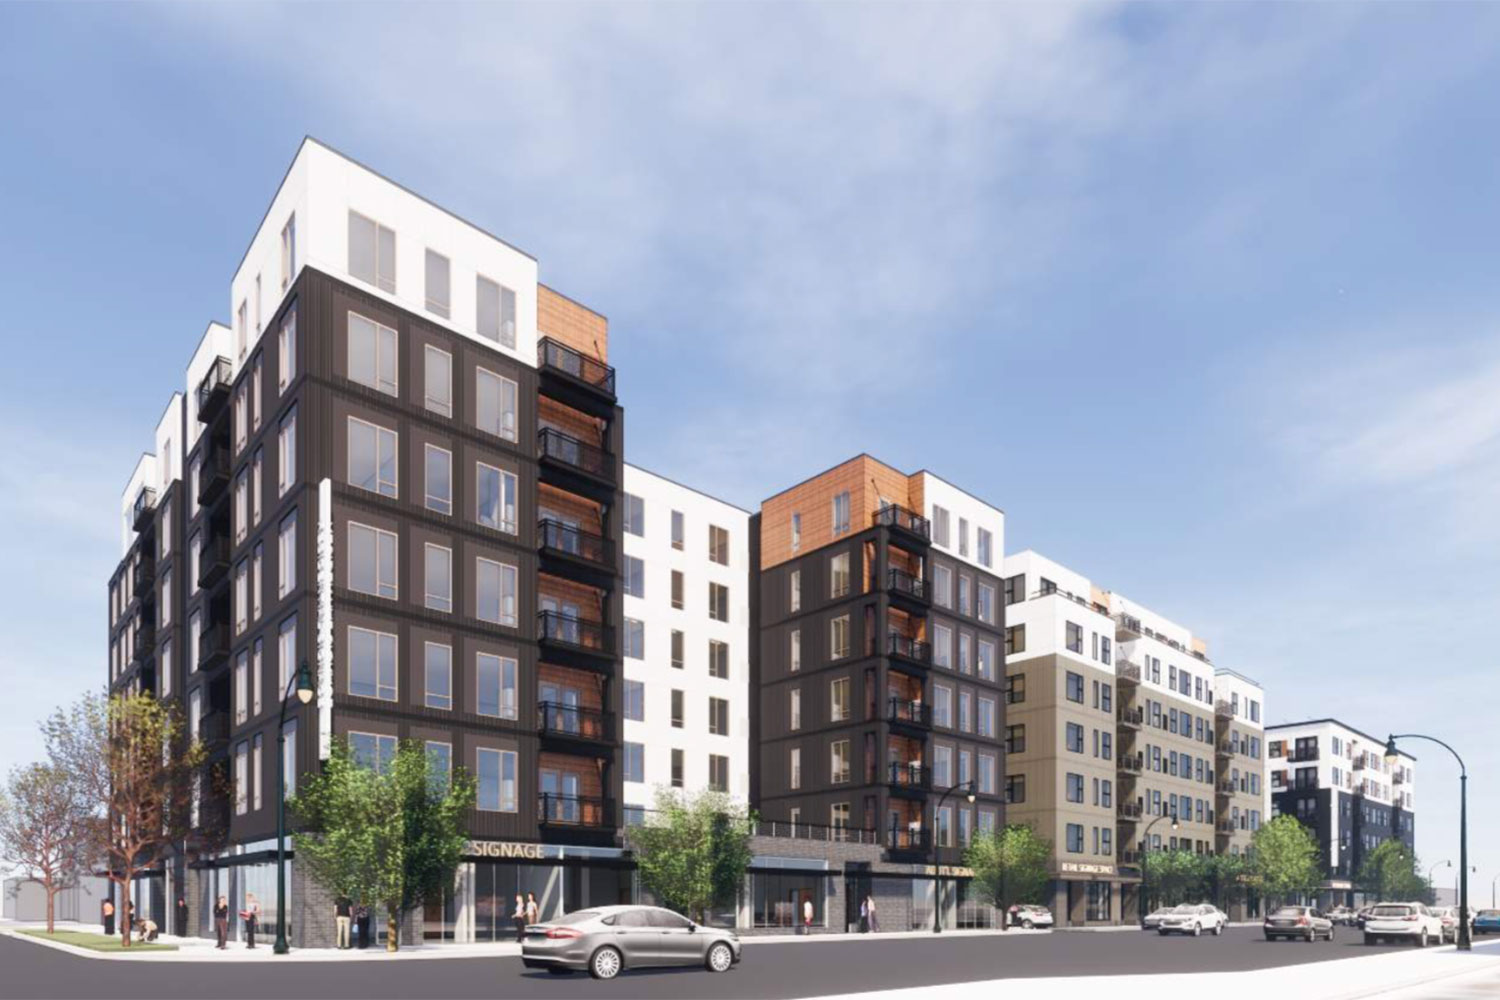 Lupe Development Partners predicts spring 2019 start for affordable housing featuring units for veterans